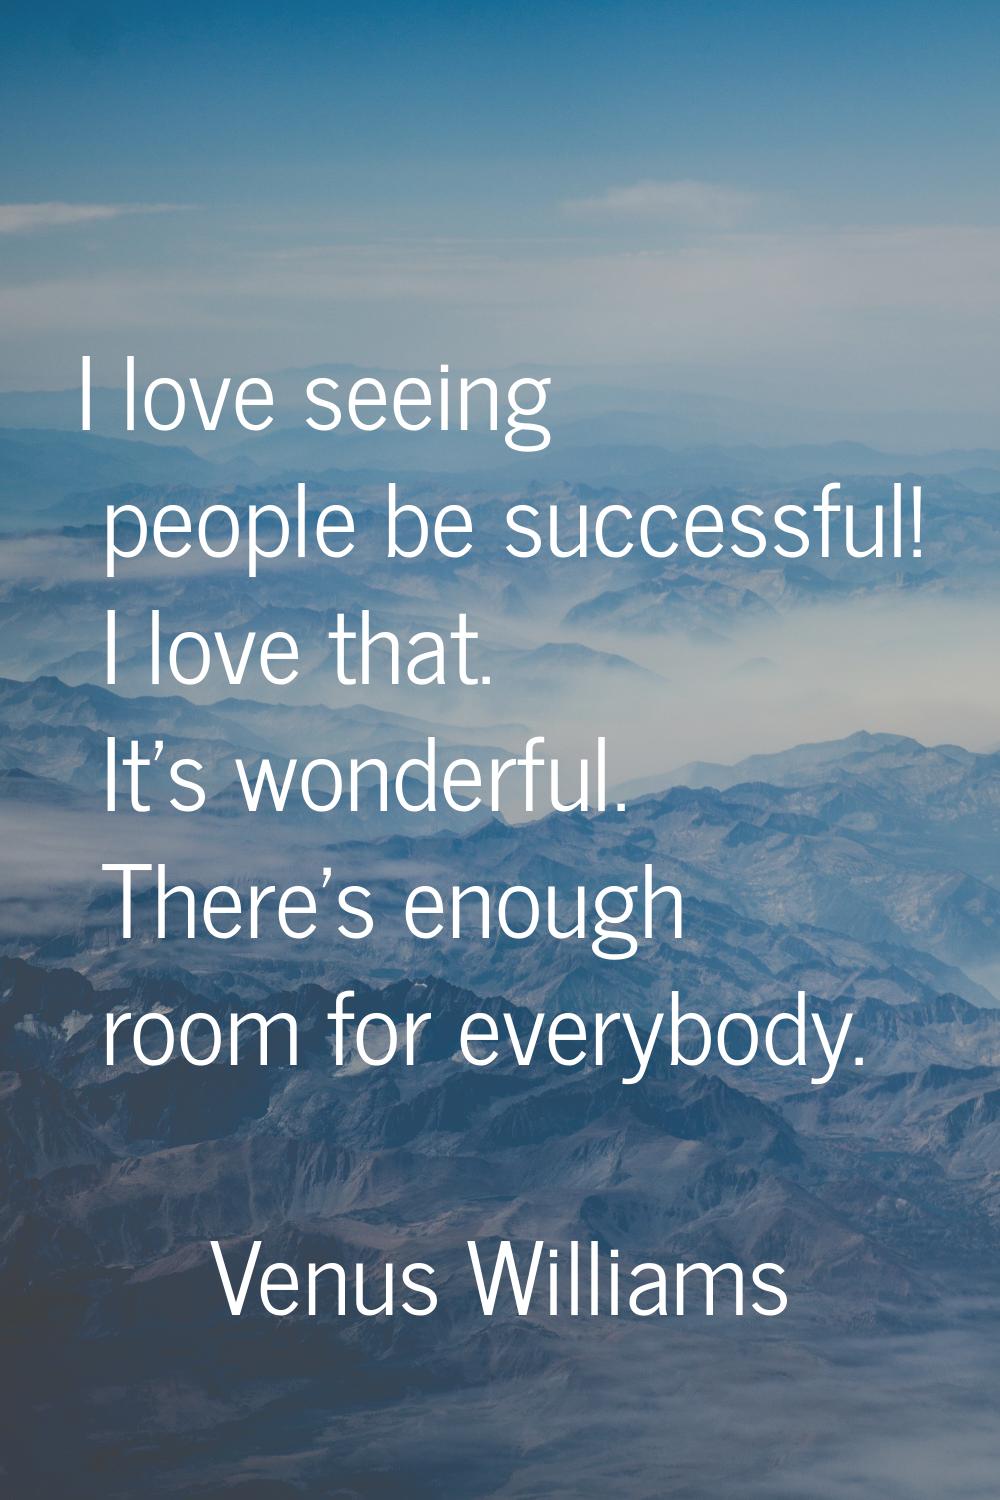 I love seeing people be successful! I love that. It's wonderful. There's enough room for everybody.